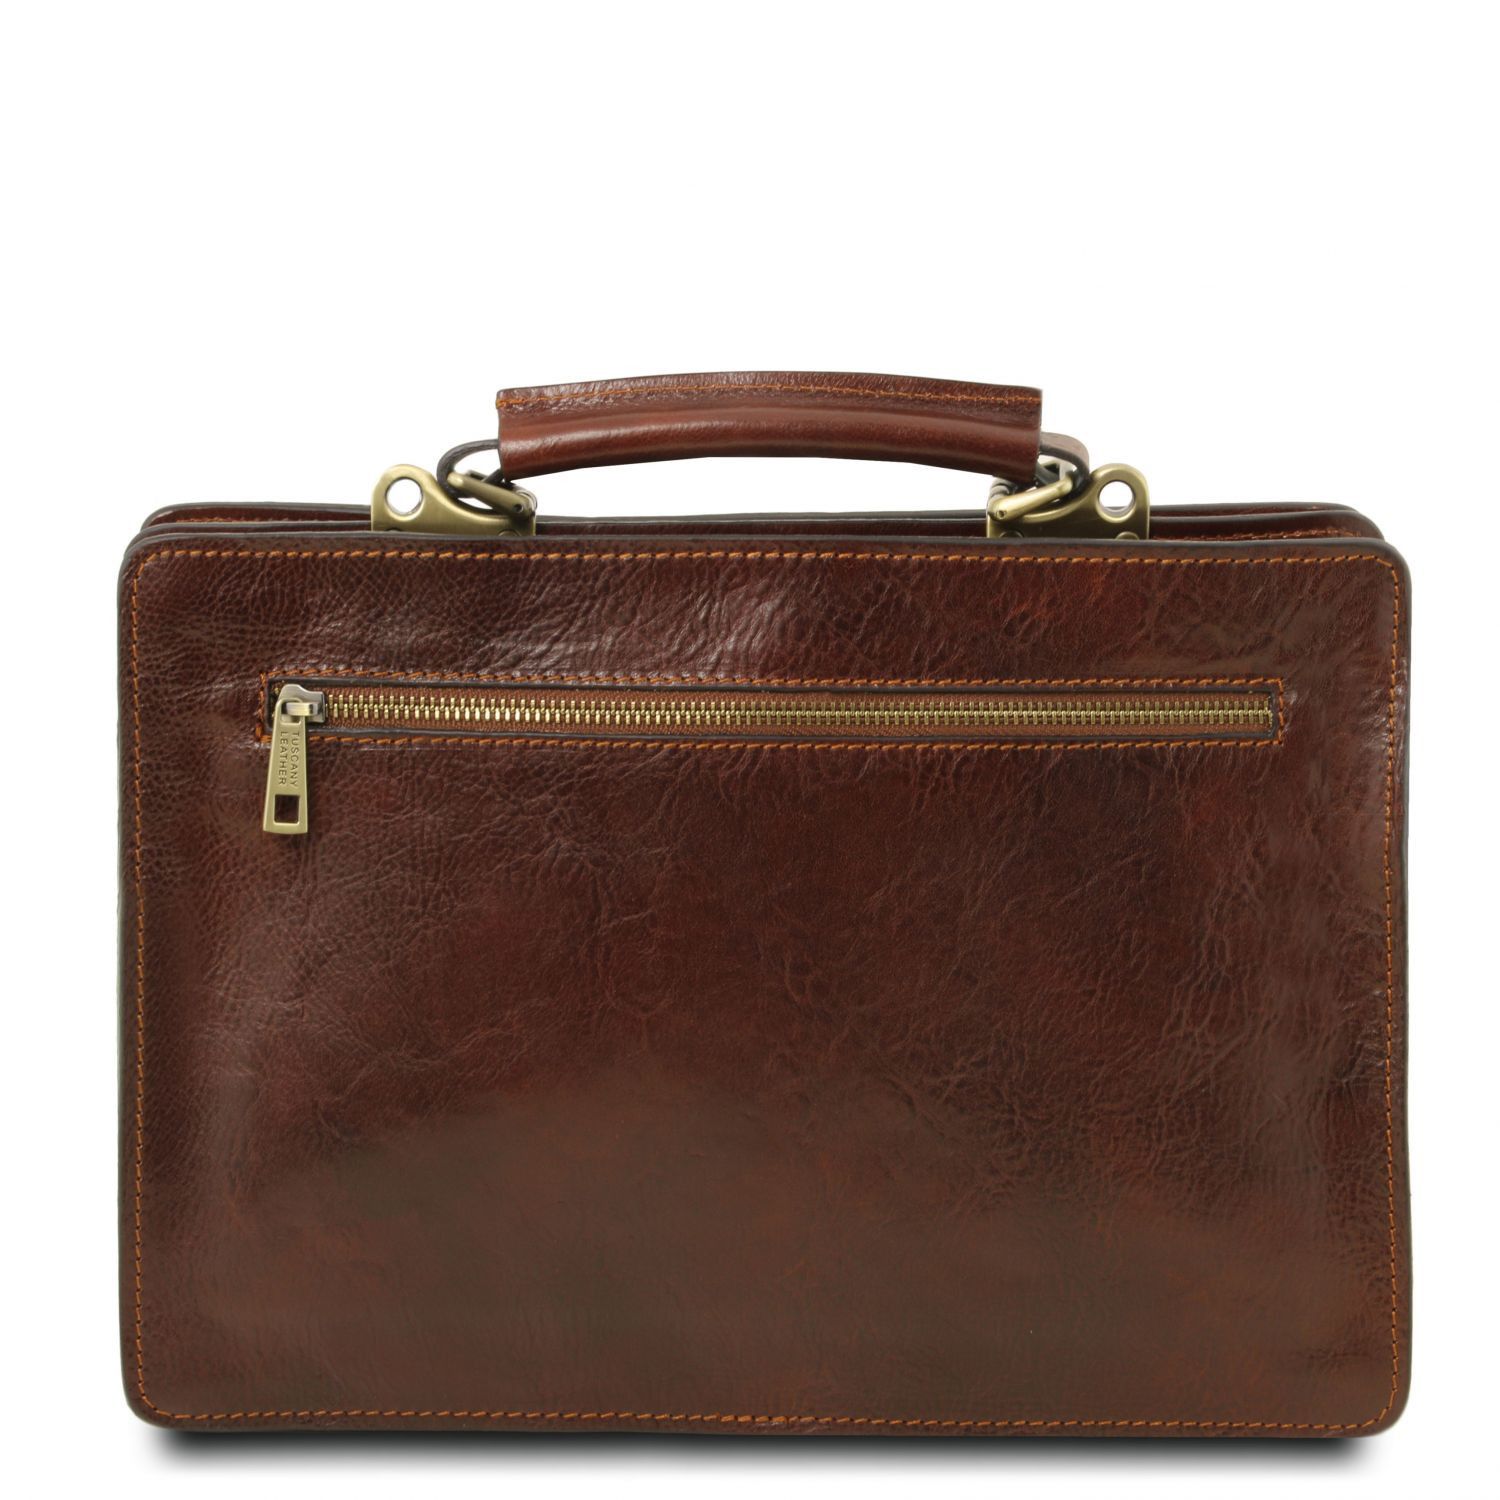 Leather Business Briefcase - Small Size - Tania - Domini Leather